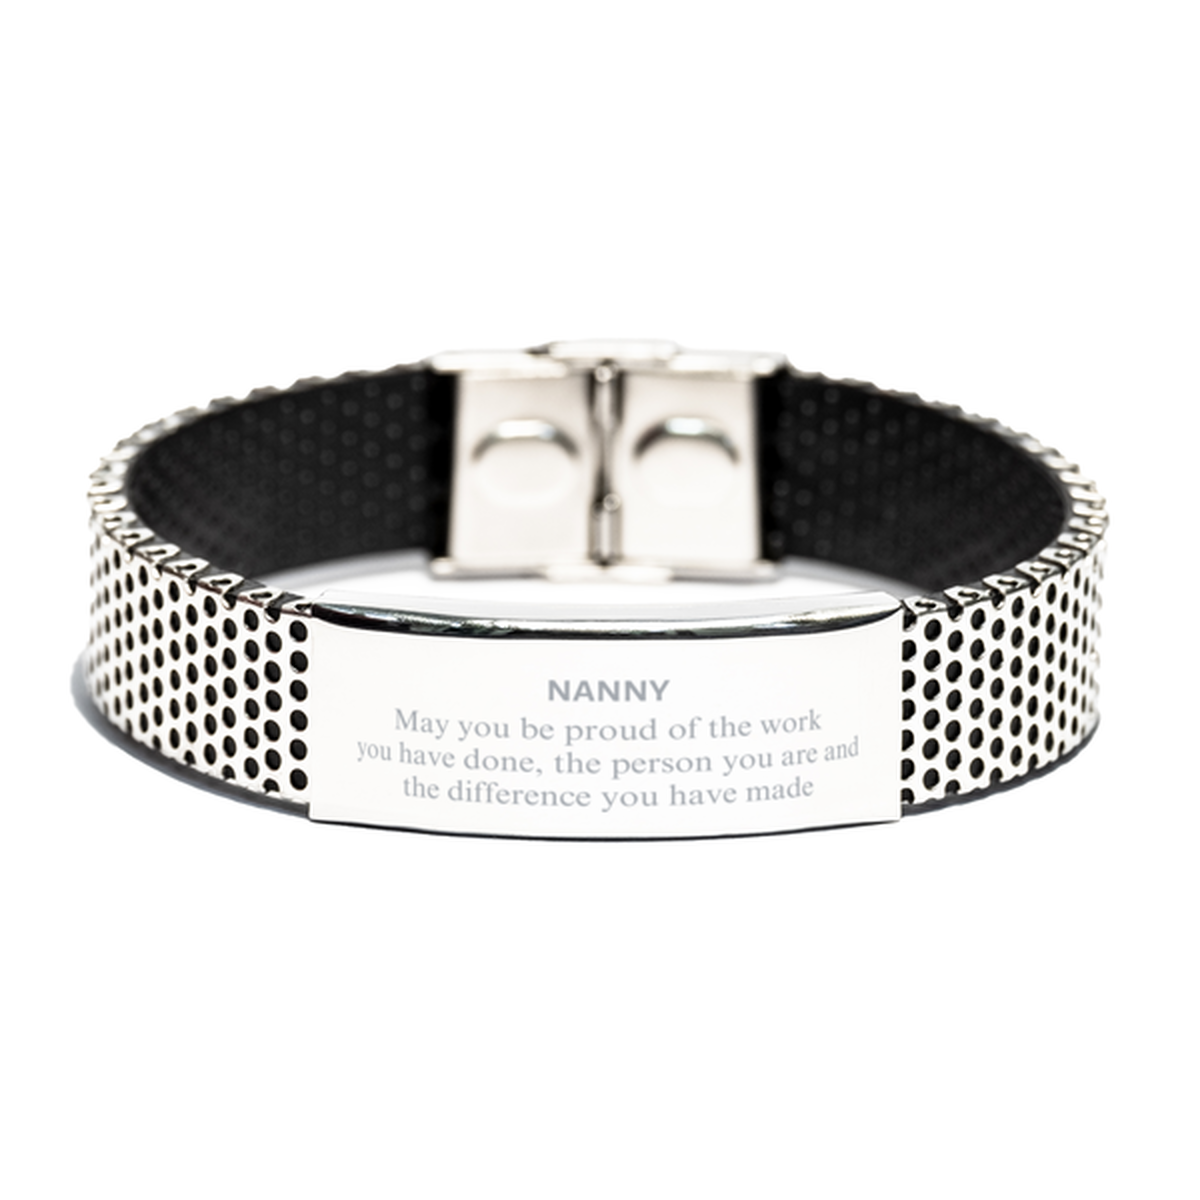 Nanny May you be proud of the work you have done, Retirement Nanny Stainless Steel Bracelet for Colleague Appreciation Gifts Amazing for Nanny